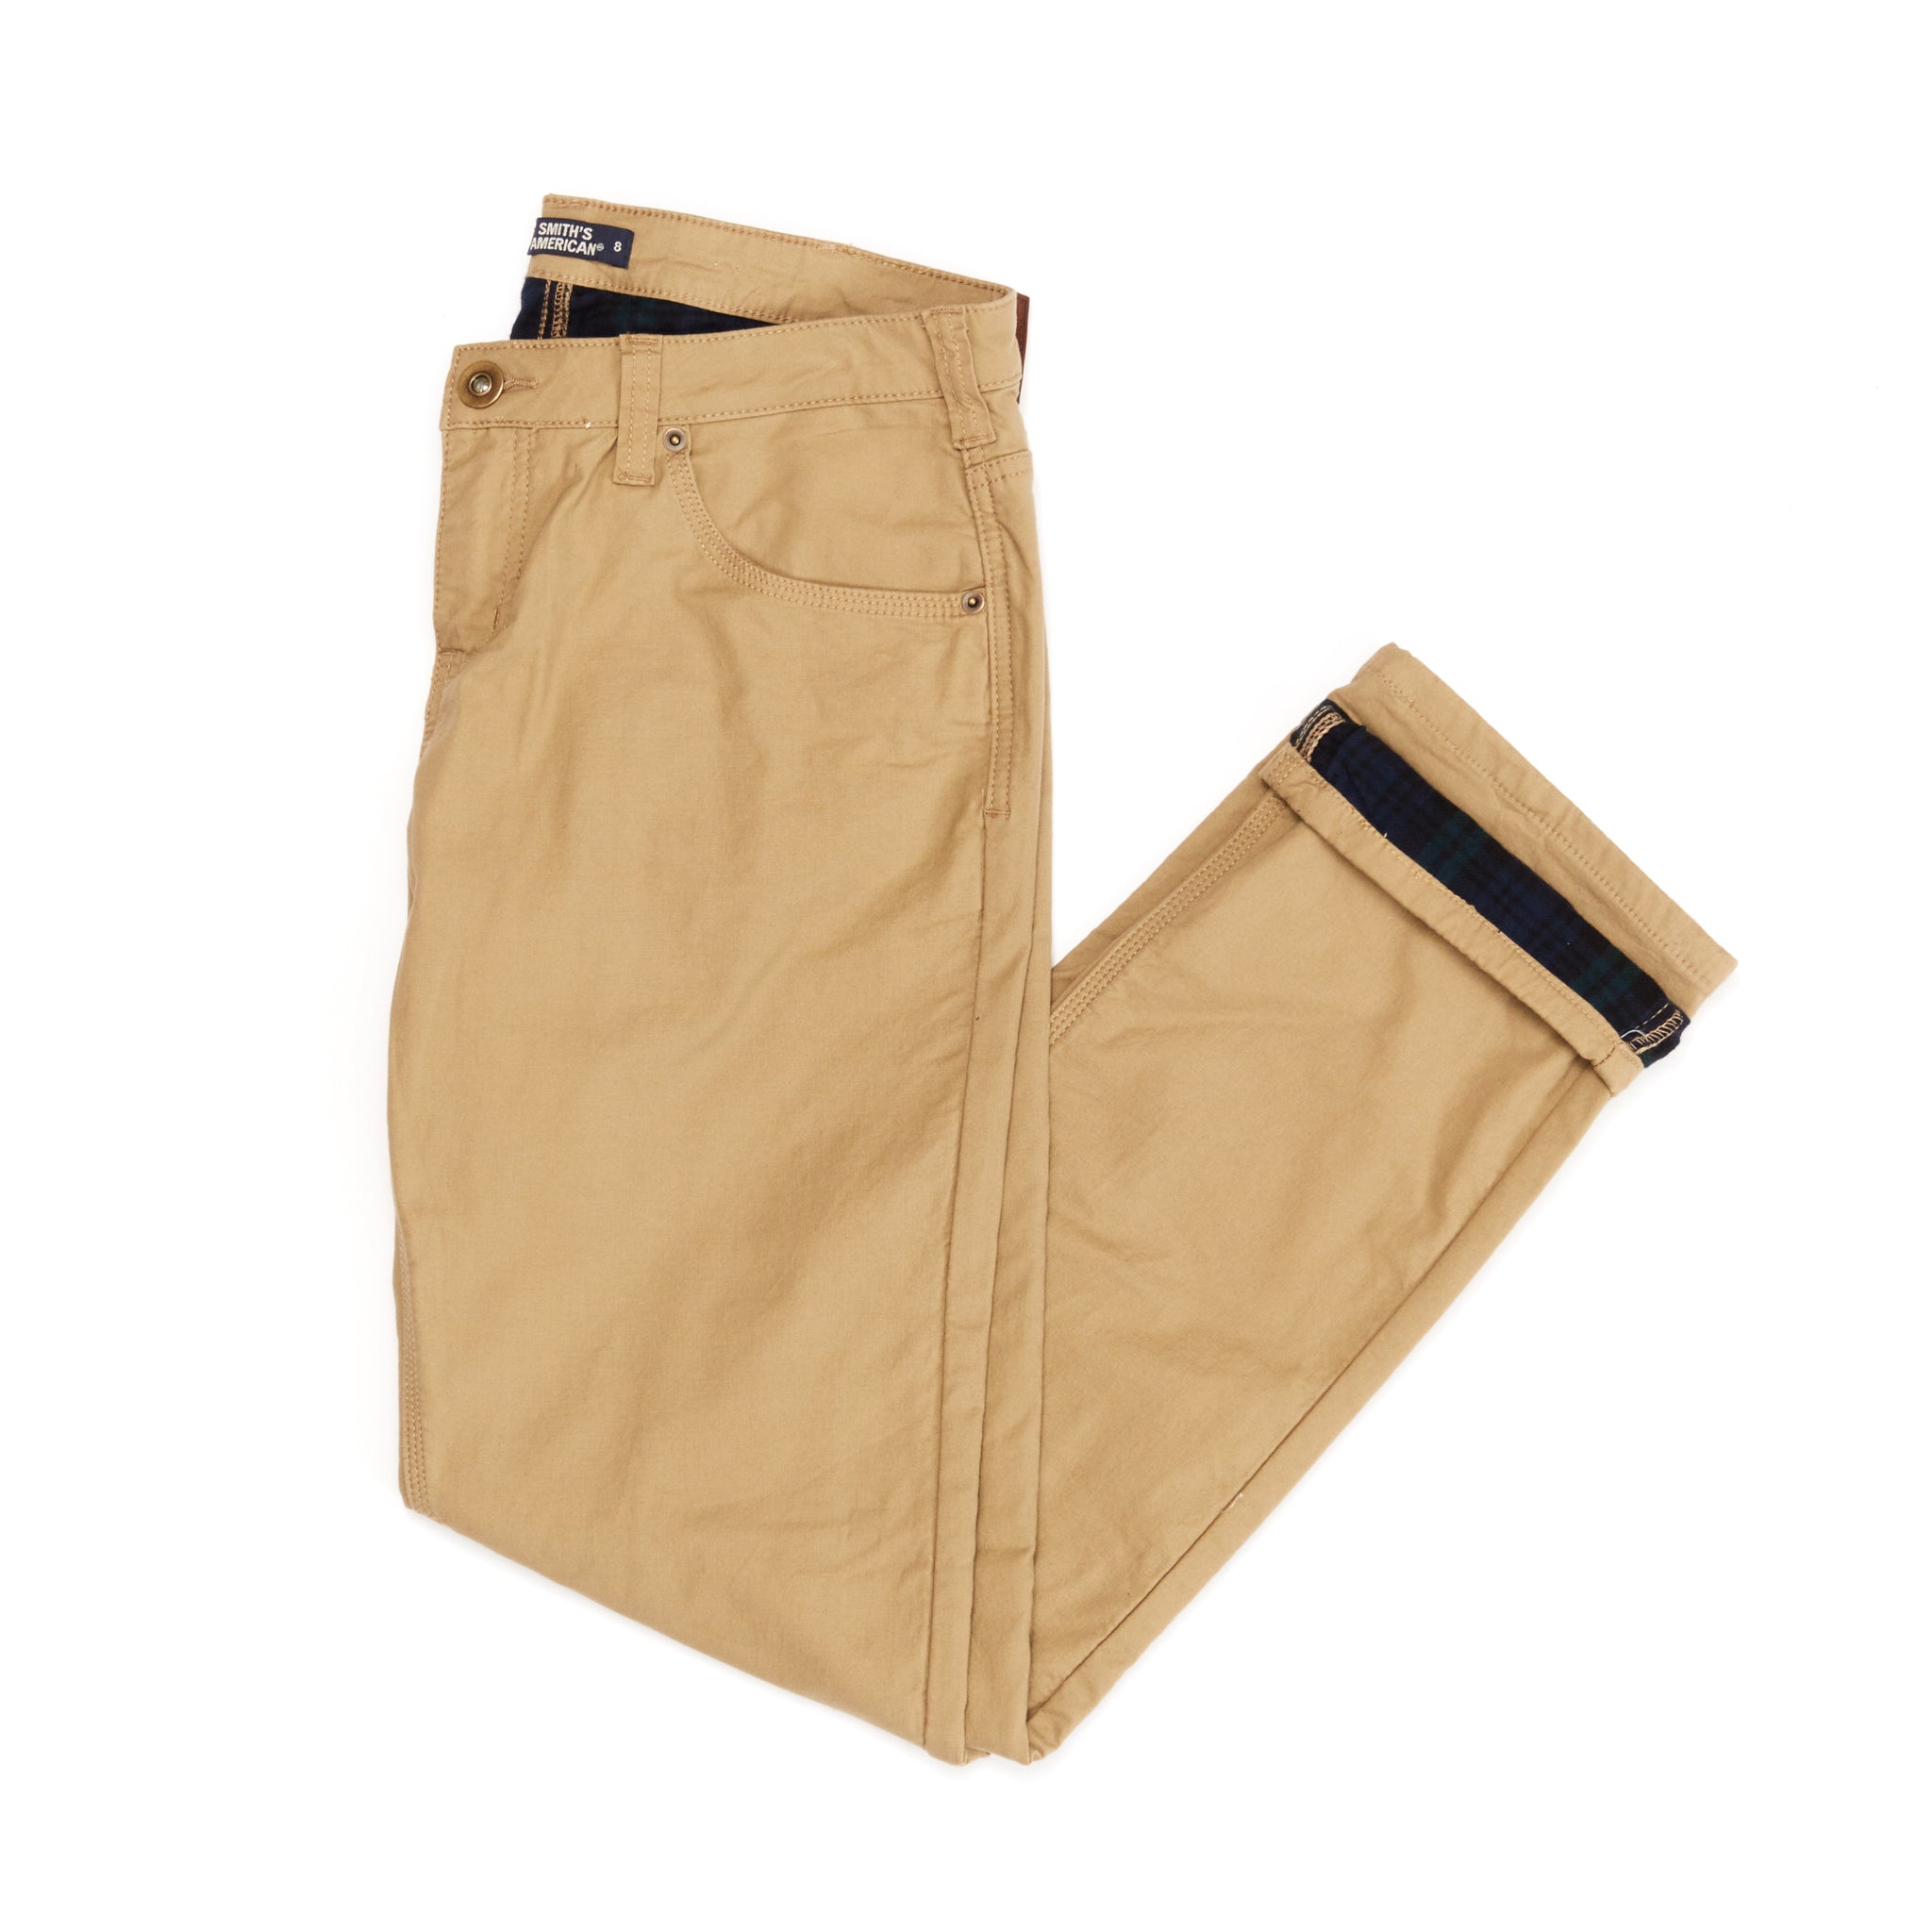 FLANNEL-LINED STRETCH CANVAS 5-POCKET PANT